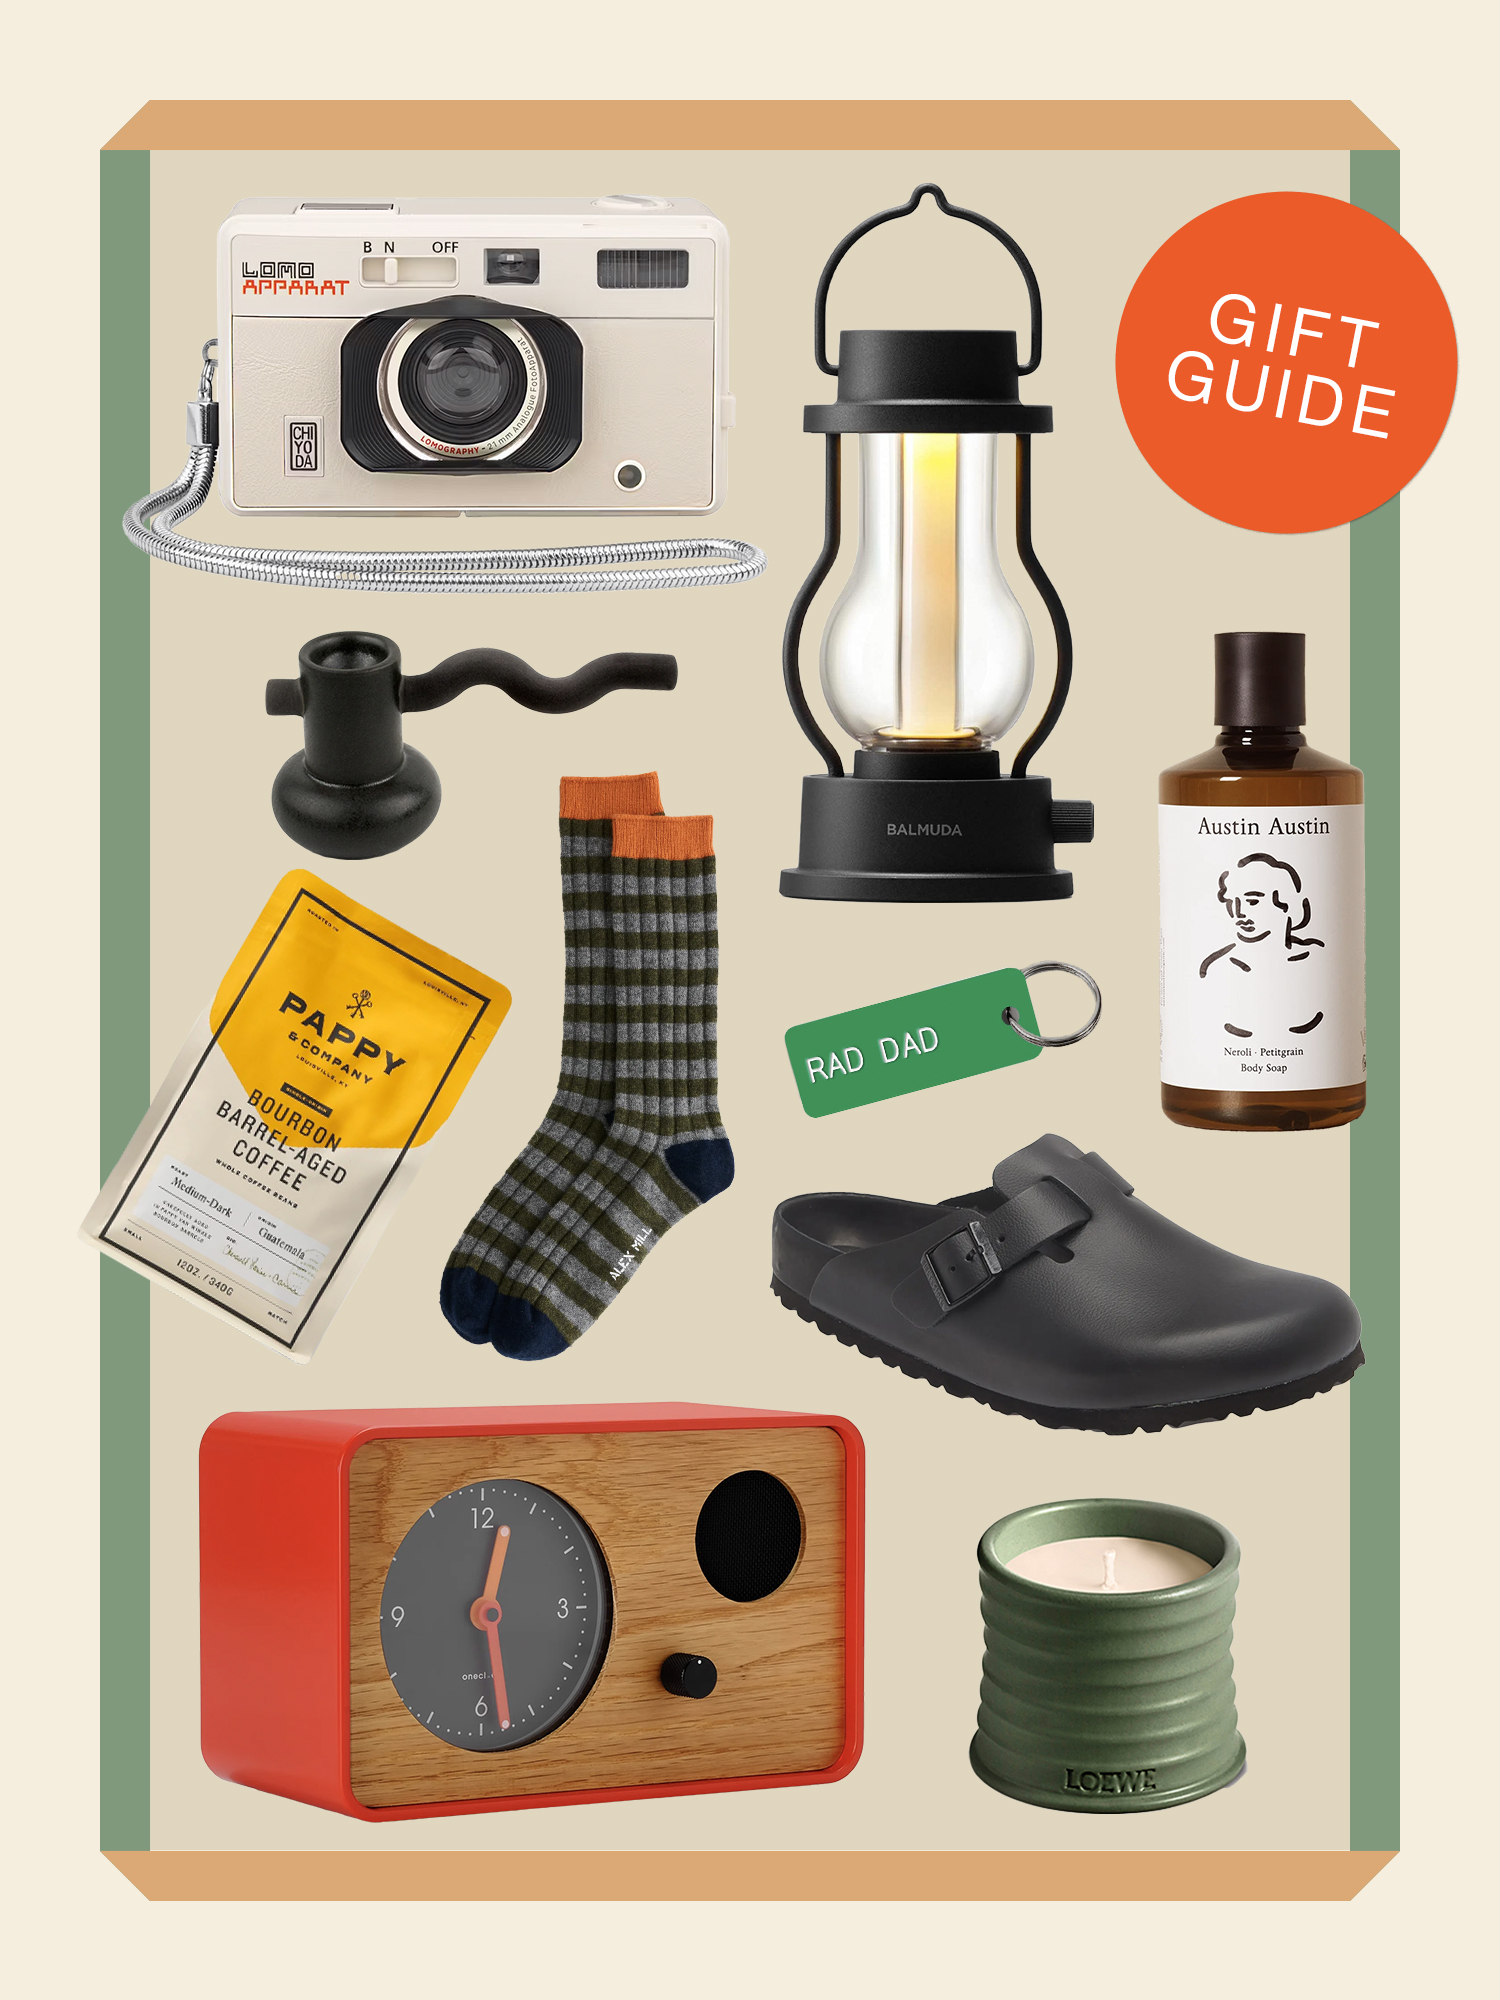 holiday gift guide : for the guys – almost makes perfect